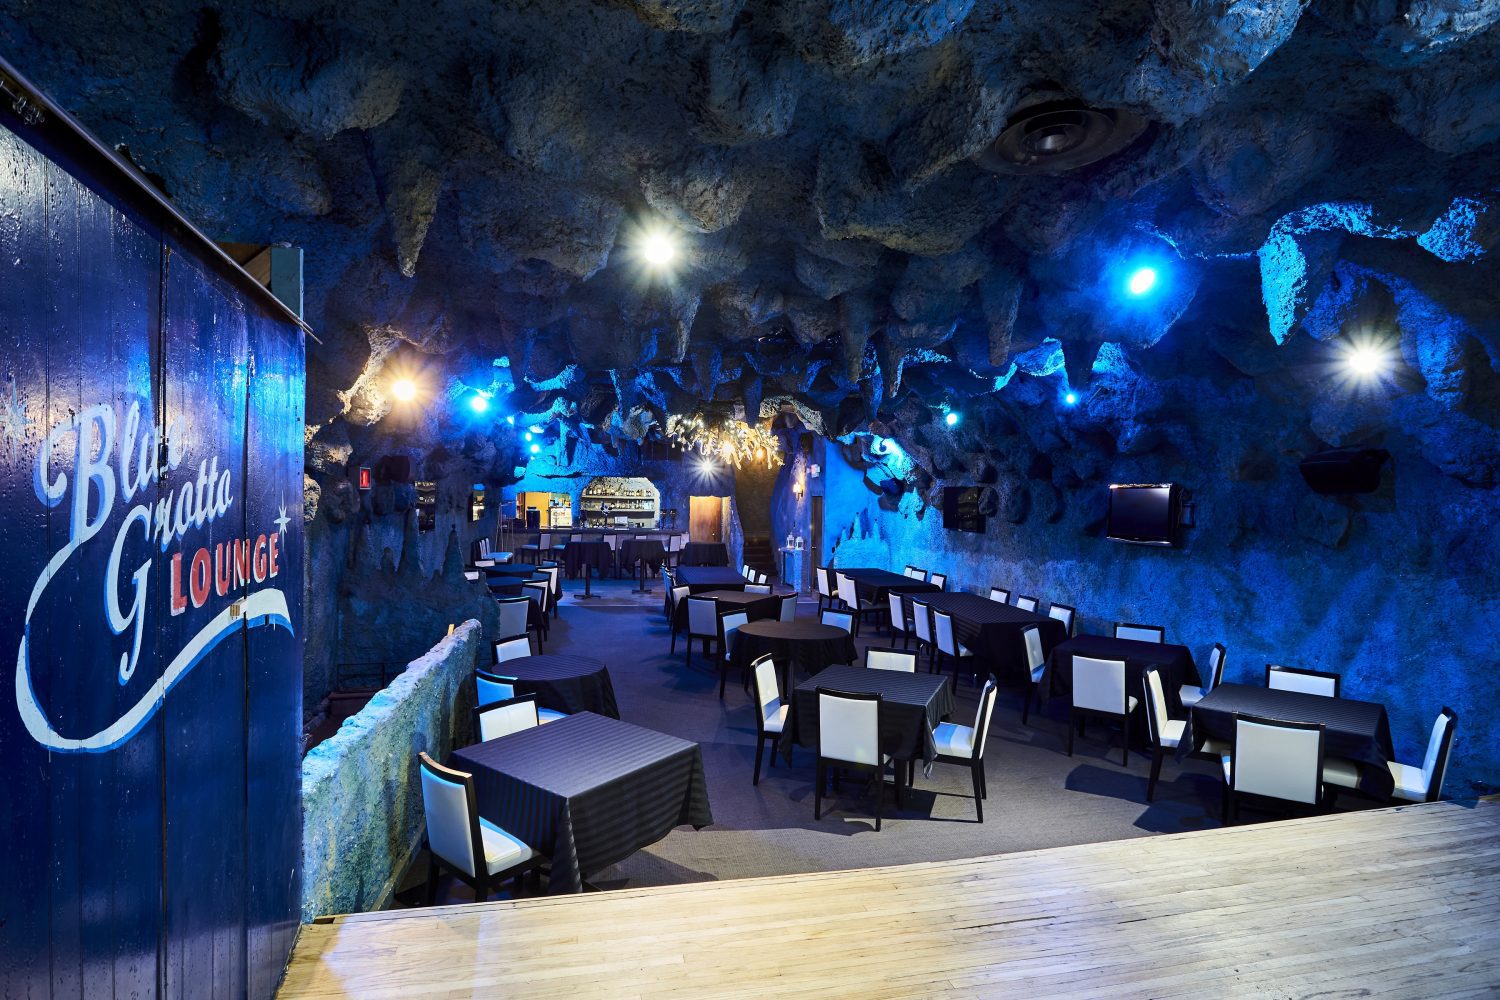 View of the Blue Grotto Lounge event room